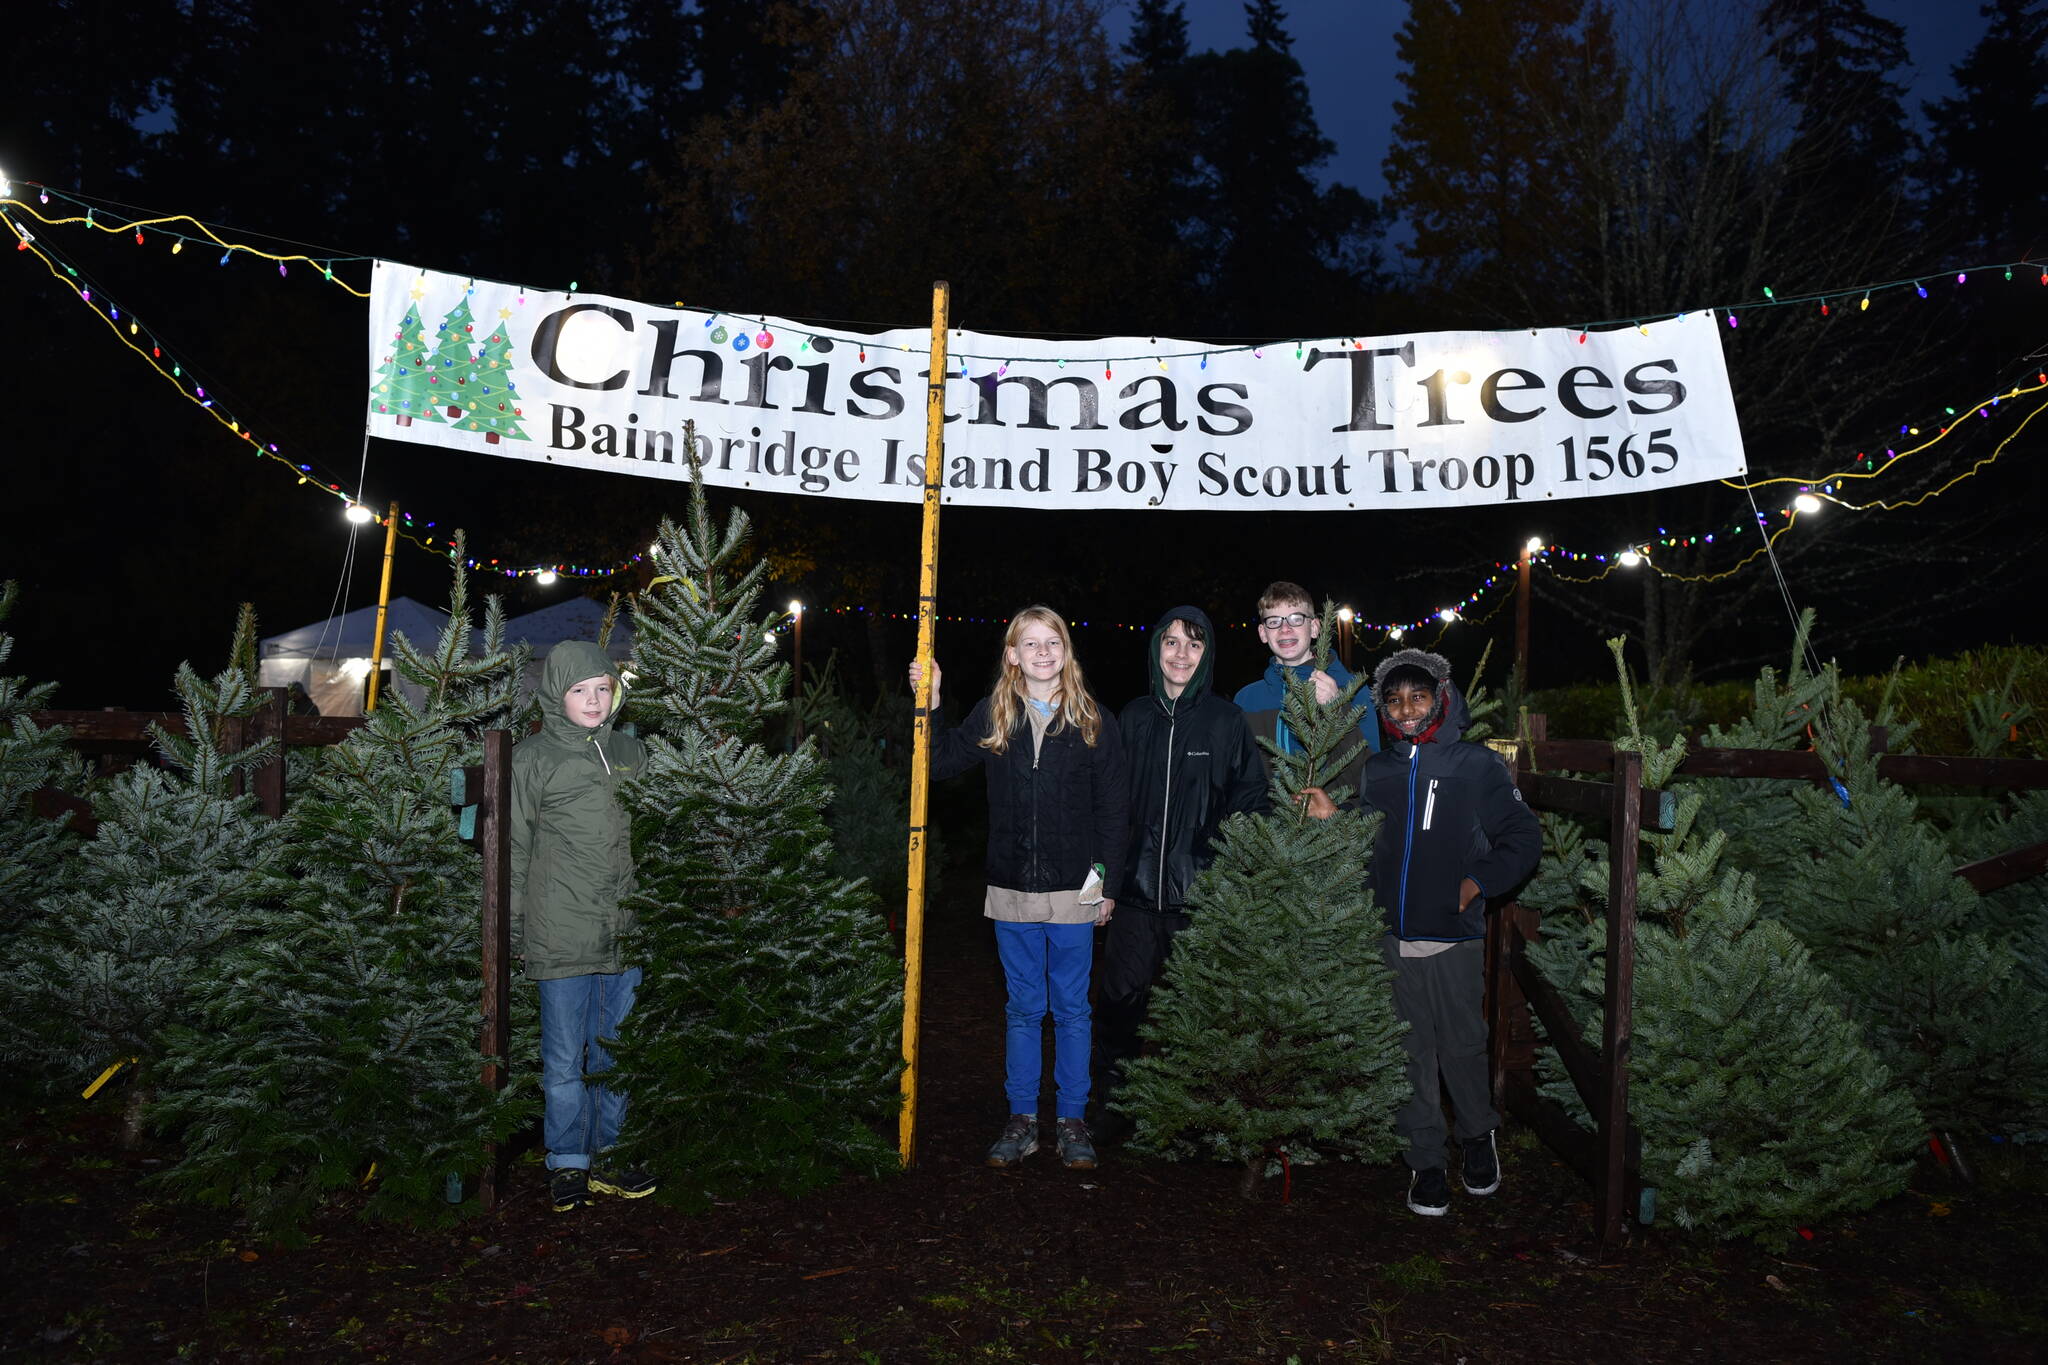 Scouts Henrik Zapf, Adrian Meidell, Ethan Meidell, Nathan Cole, Jason Arul selling trees to support the Bainbridge Island Boy Scout Troop 1565. The Christmas Tree lot is located next to Ace Hardware on High School Road.